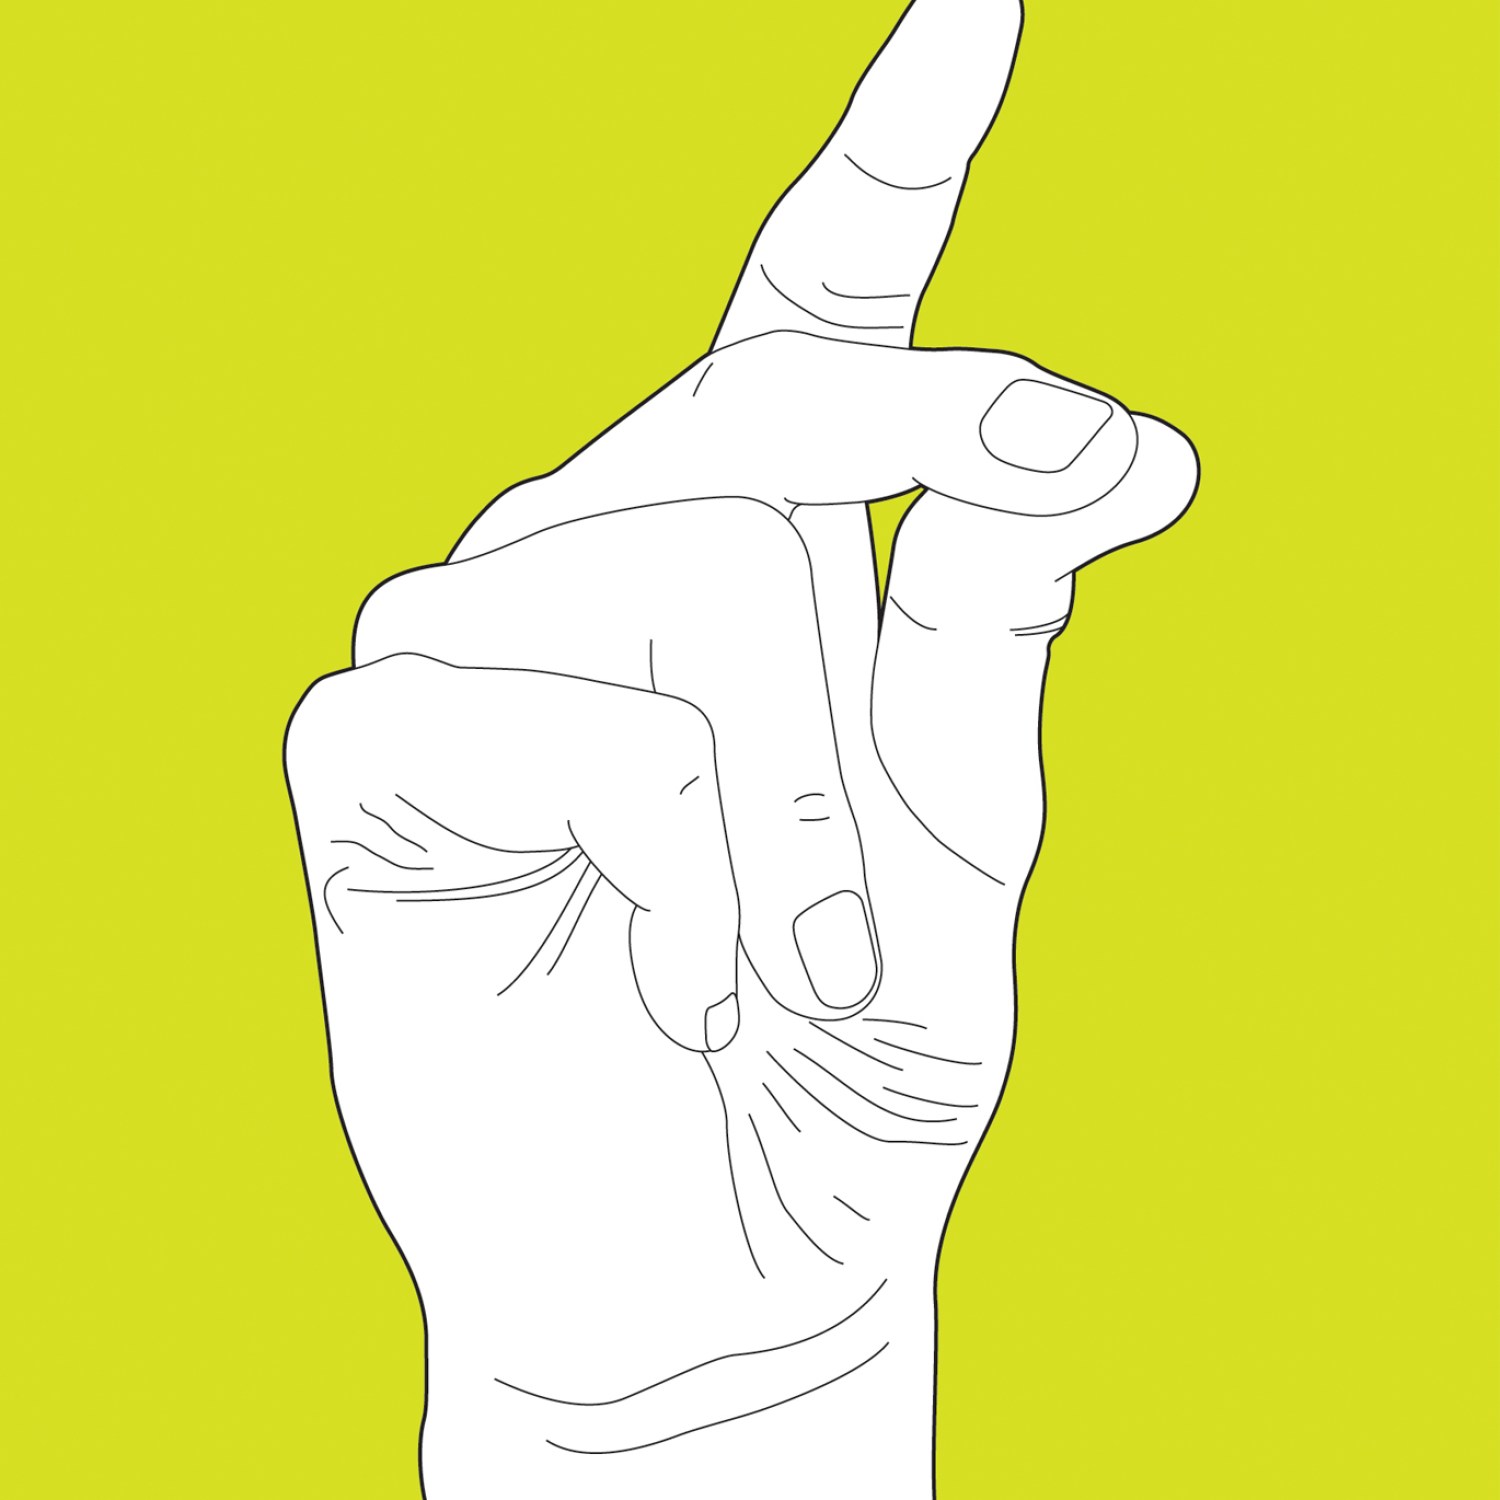 Illustration of hand snapping against yellow-green color